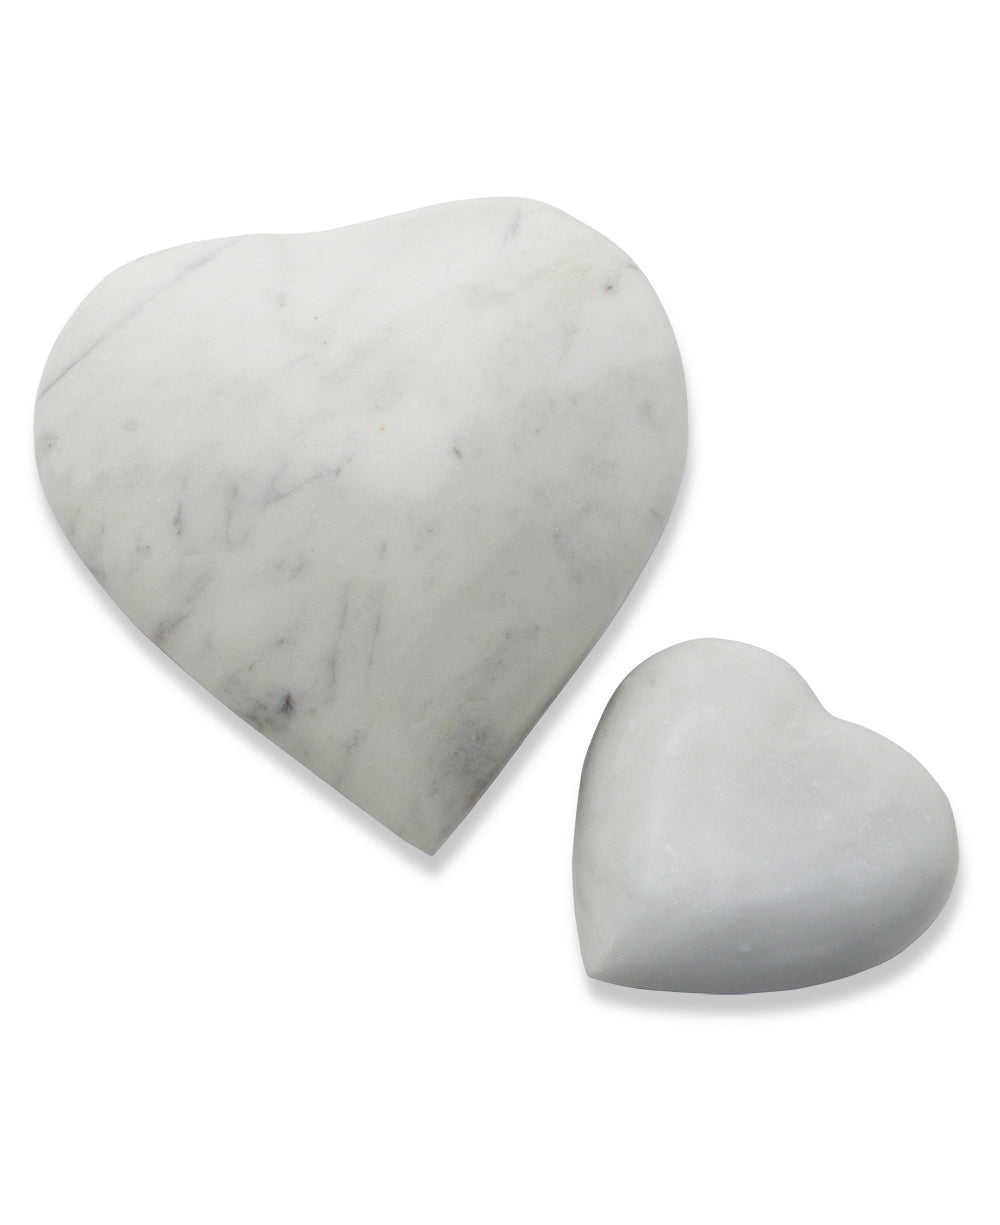 Heart Shaped Paperweights